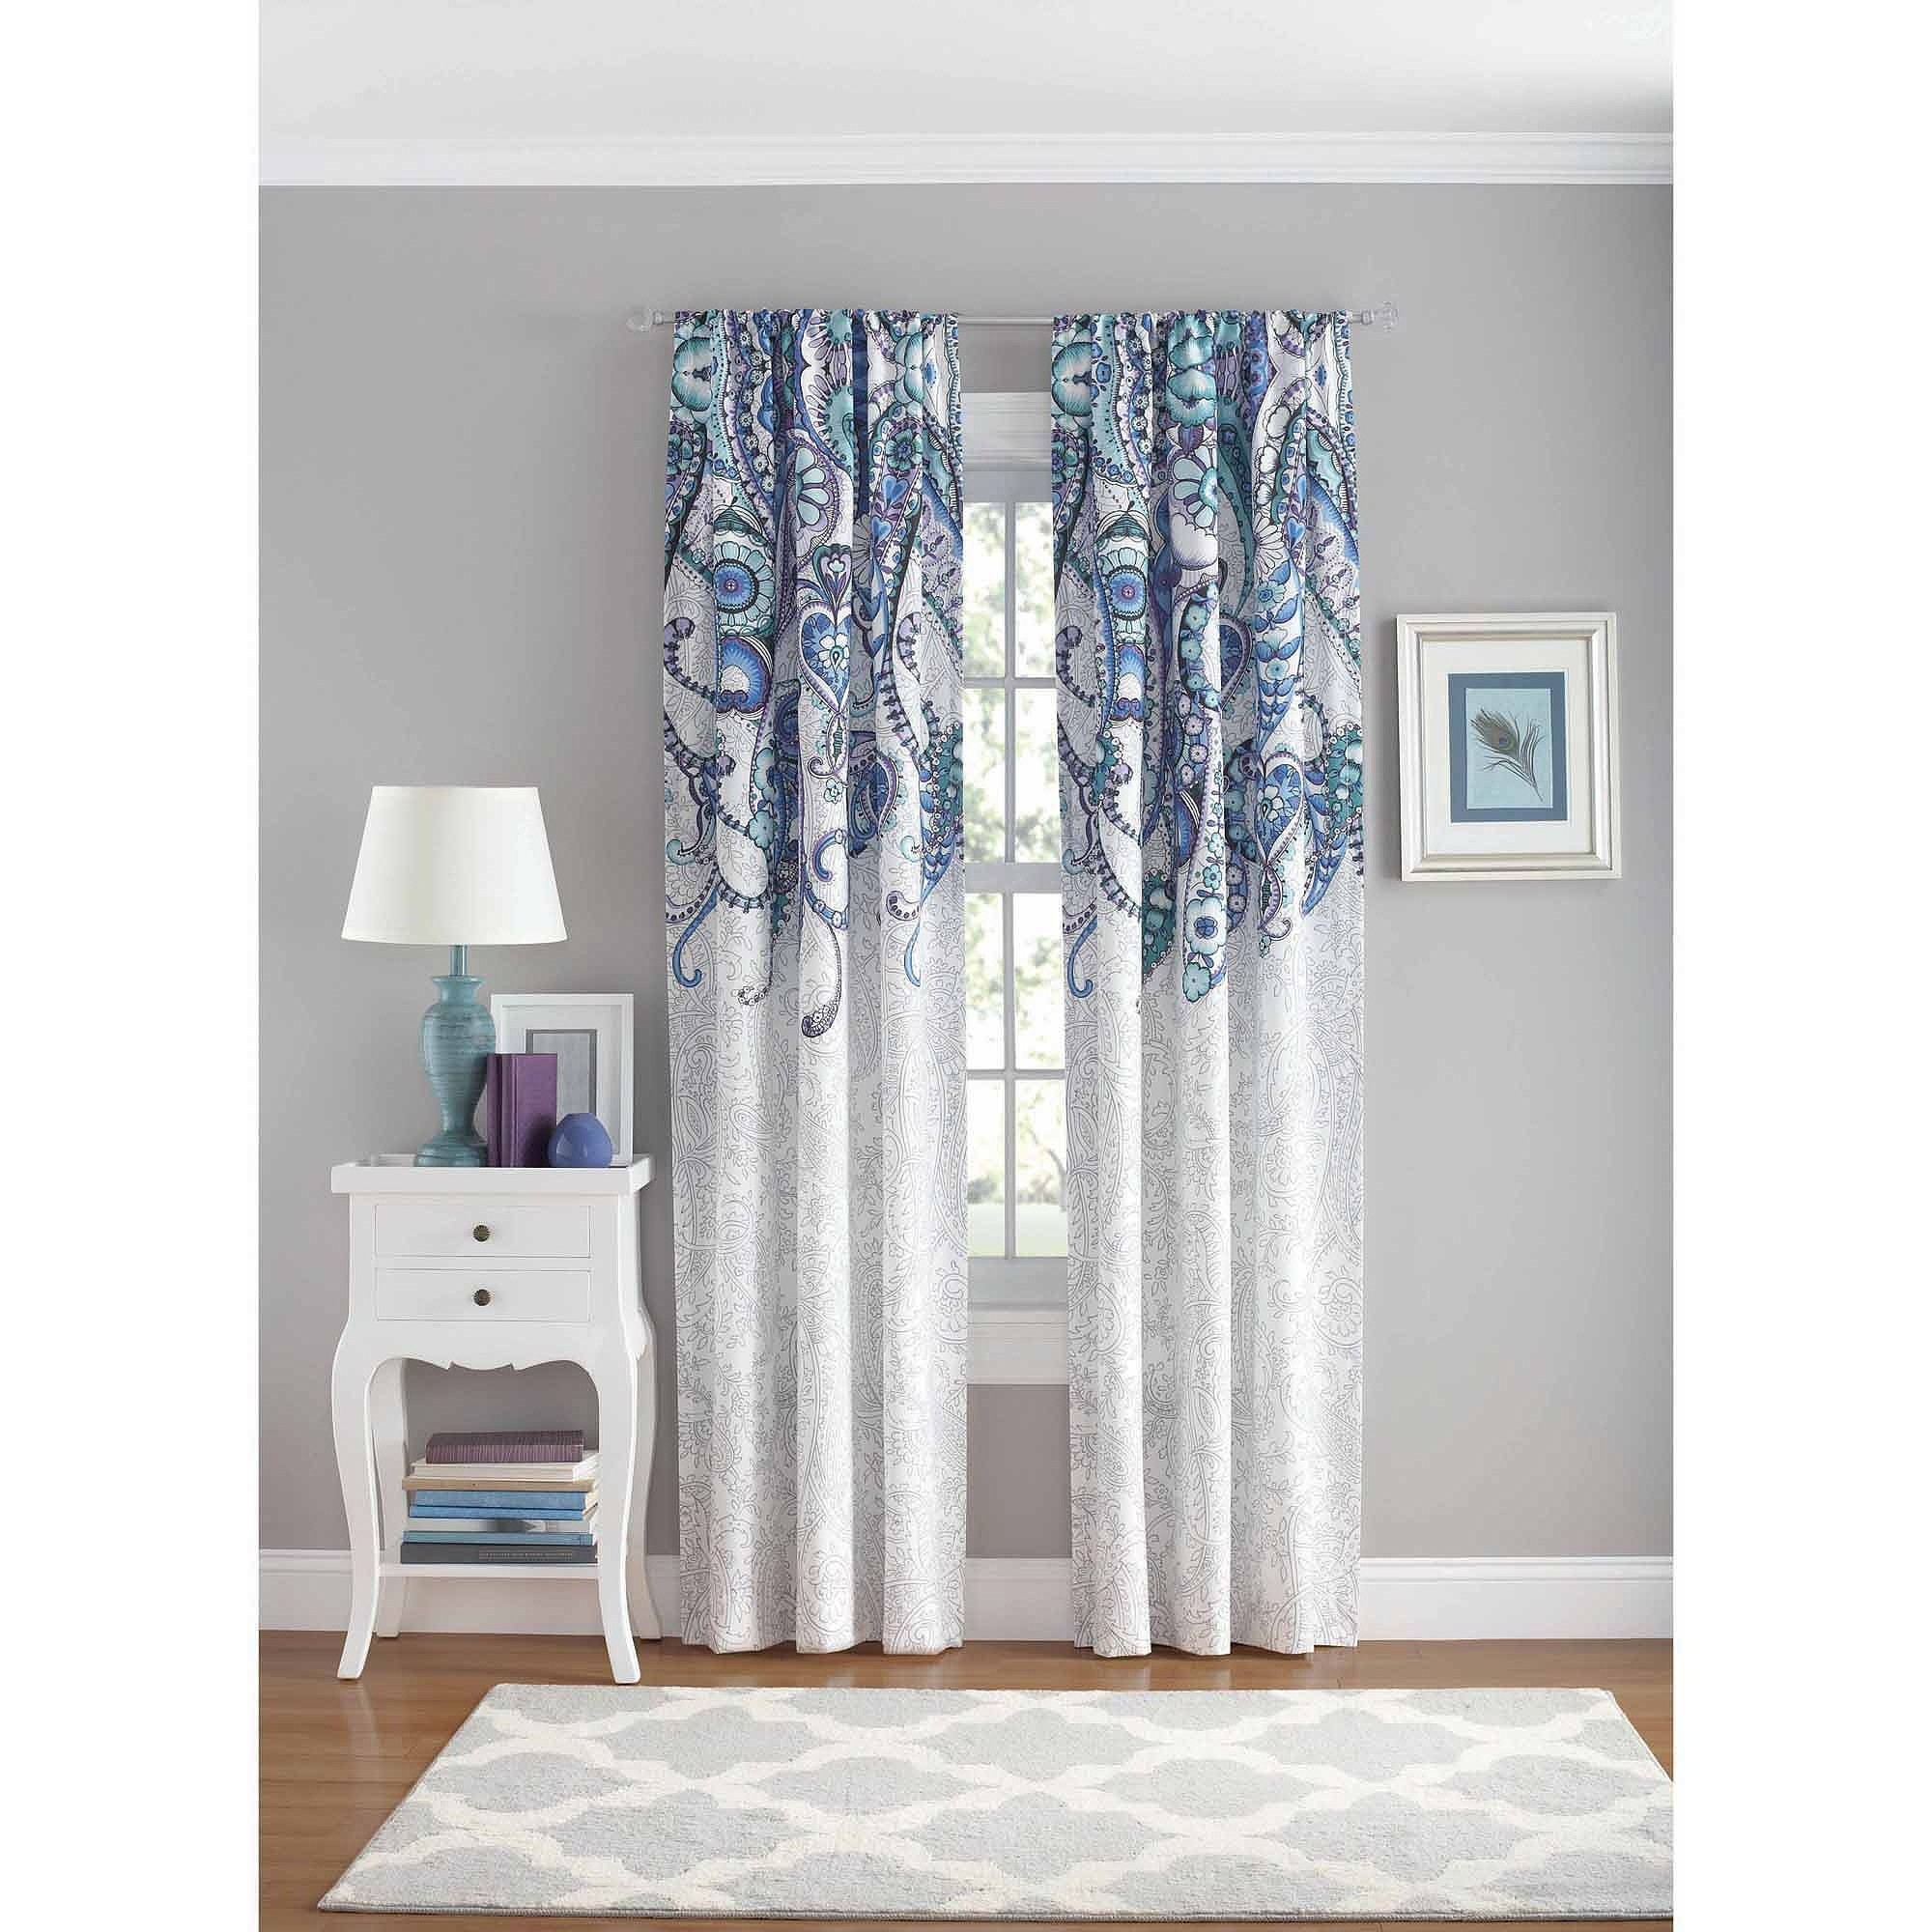 Walmart Living Room Curtains
 Curtain Curtains At Walmart For Elegant Home Accessories